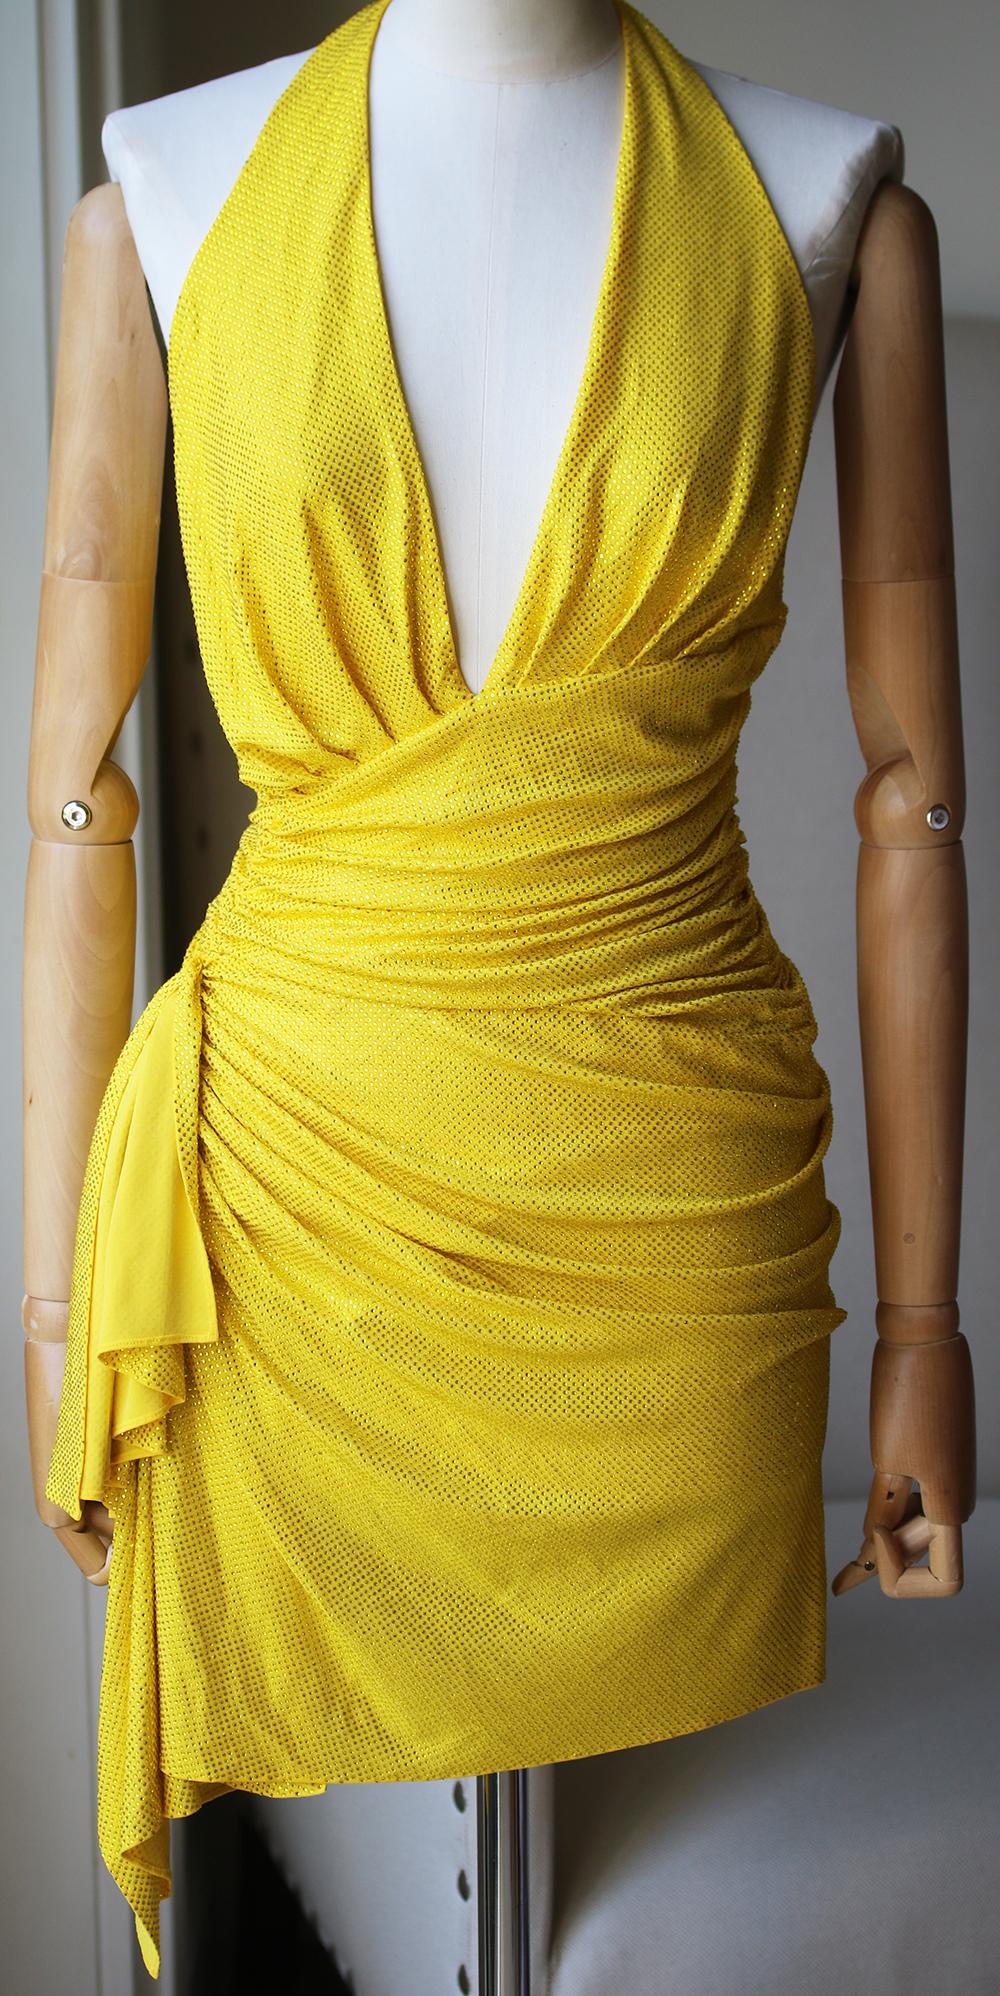 Crossover neckline. Microcrystal embellished accents throughout. Ruched side detail with draped fabric accent. Fully lined. Colour: yellow. Made in Italy. 92% viscose, 8% elastane. 

Size: IT 38 (UK 6, US 2, FR 34)

Condition: As new condition, no